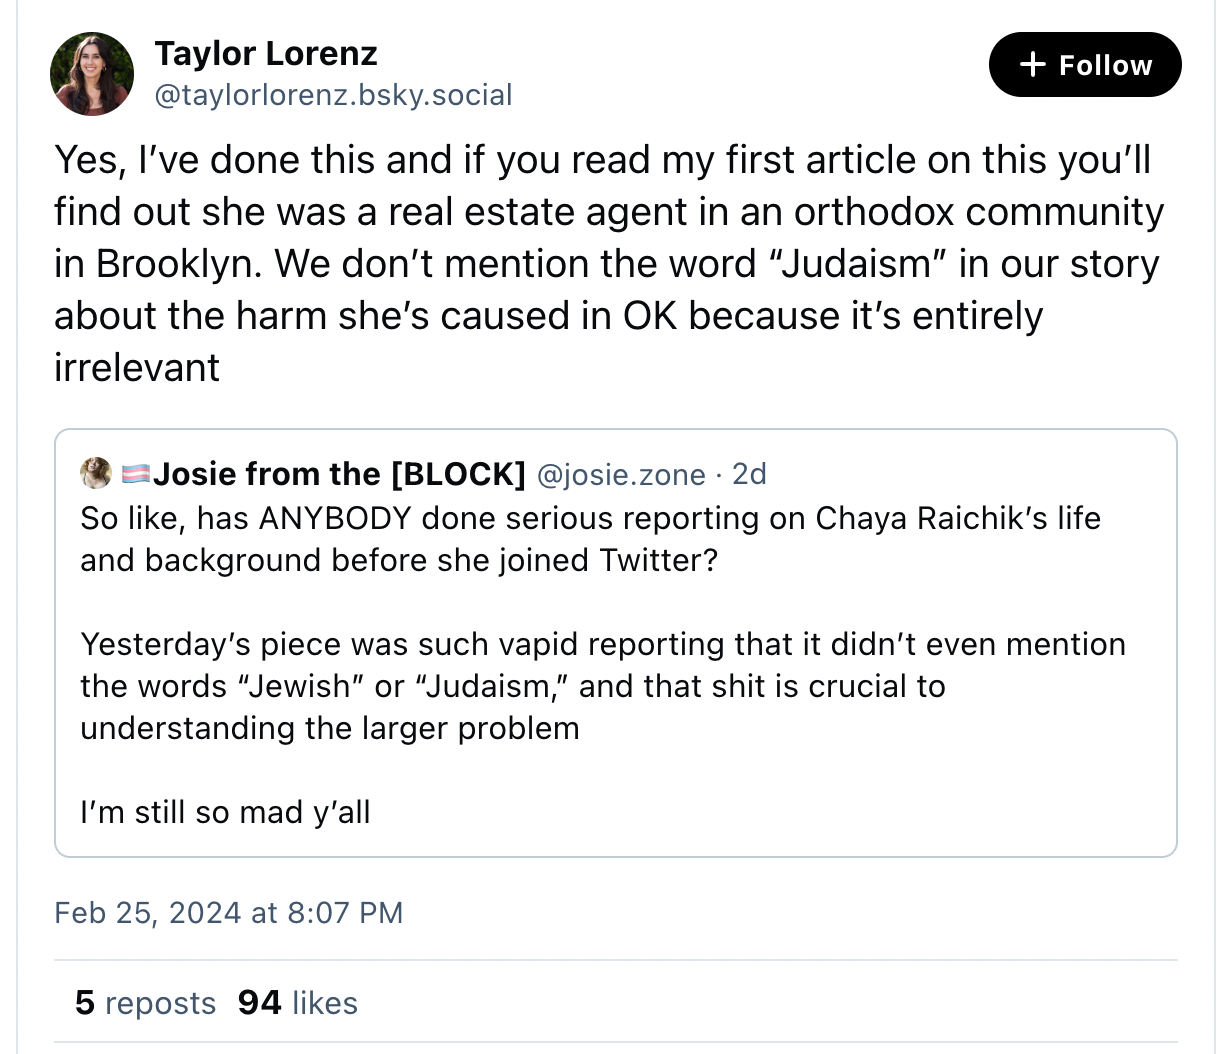 JOSIE RIESMAN: So like, has ANYBODY done serious reporting on Chaya Raichik’s life and background before she joined Twitter? Yesterday’s piece was such vapid reporting that it didn’t even mention the words “Jewish” or “Judaism,” and that shit is crucial to understanding the larger problem. I’m still so mad y’all. LORENZ: Yes, I’ve done this and if you read my first article on this you’ll find out she was a real estate agent in an orthodox community in Brooklyn. We don’t mention the word “Judaism” in our story about the harm she’s caused in OK because it’s entirely irrelevant 